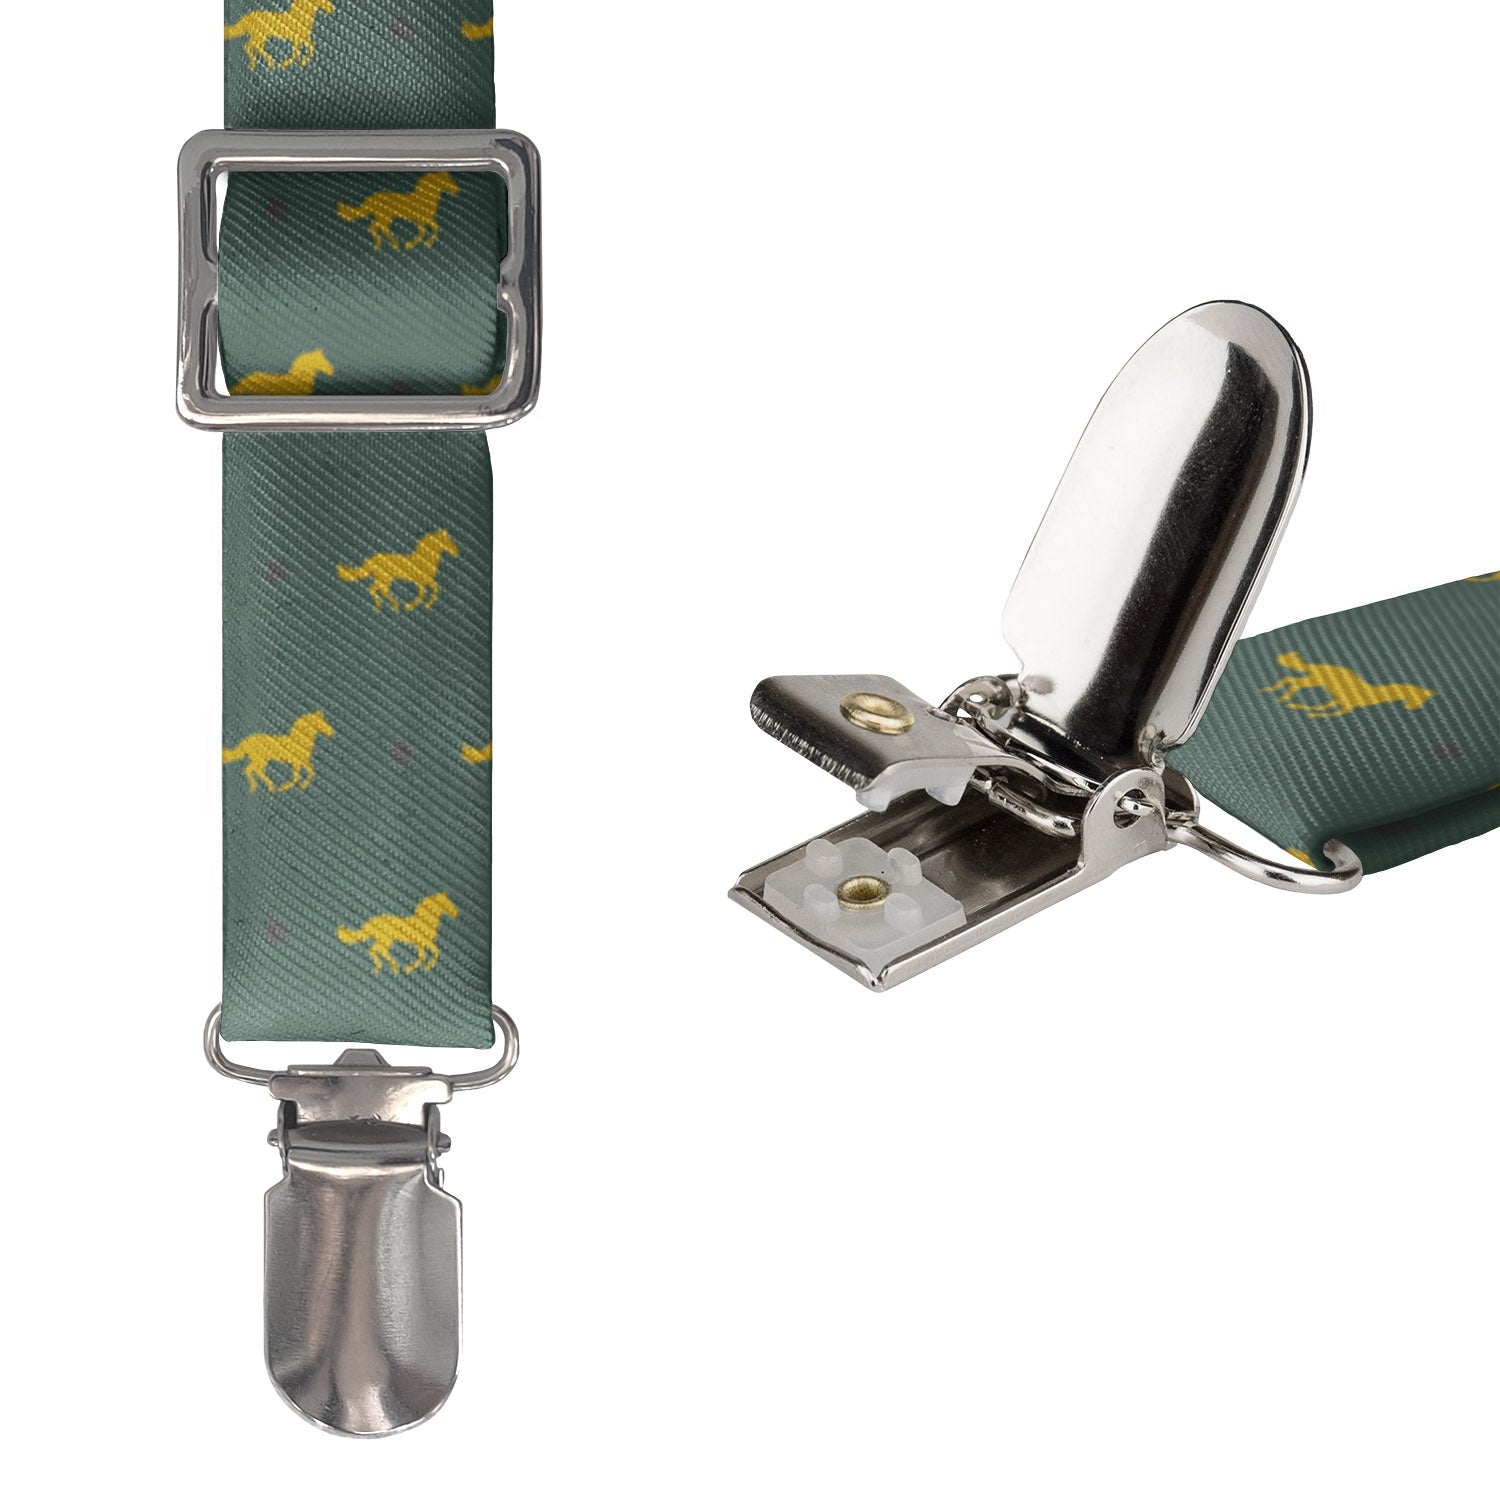 Derby Horses Suspenders -  -  - Knotty Tie Co.